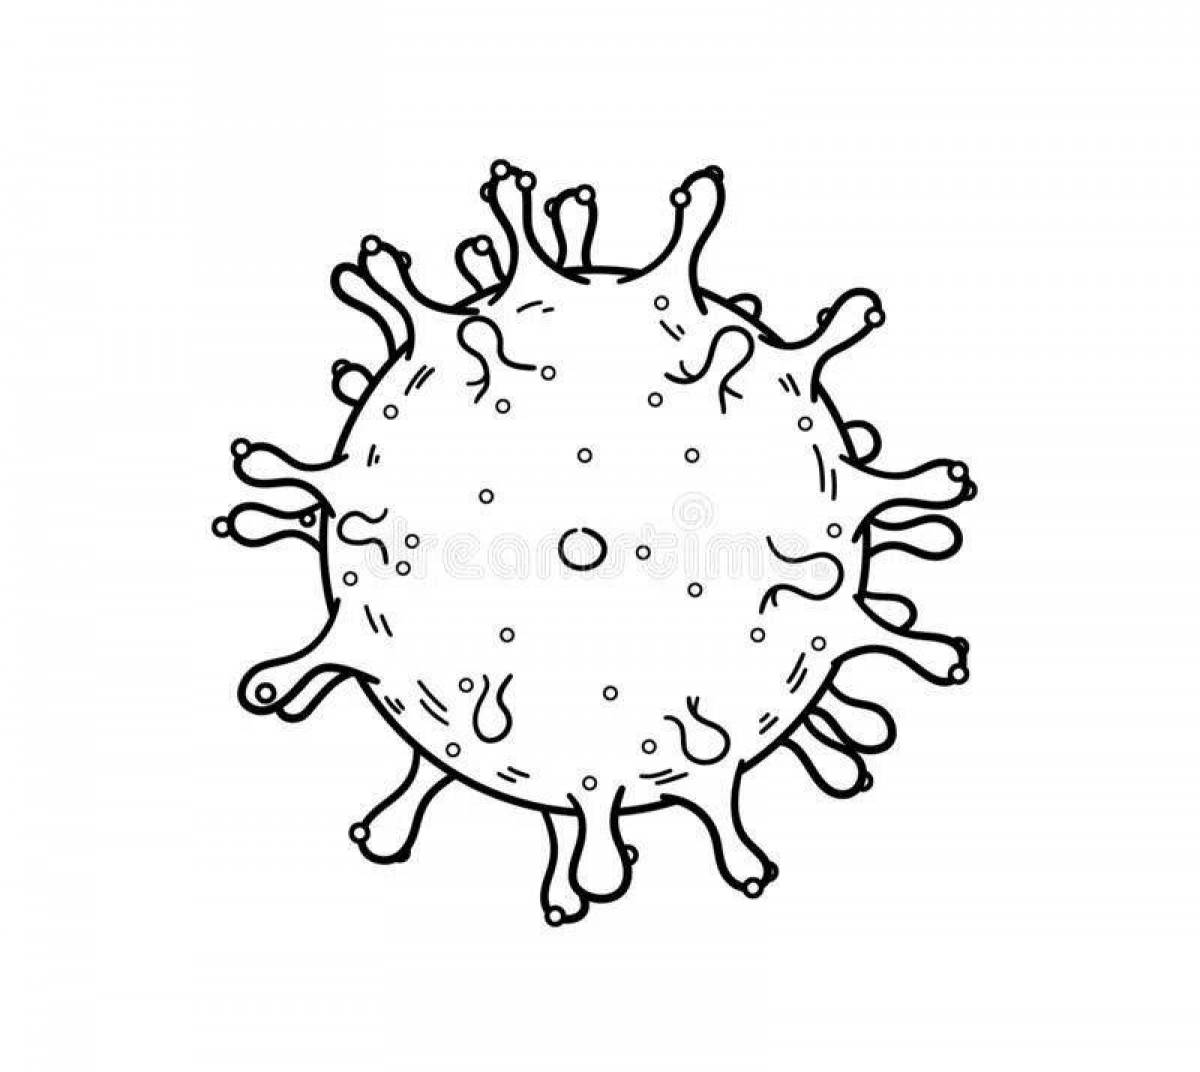 Amazing coloring page virus